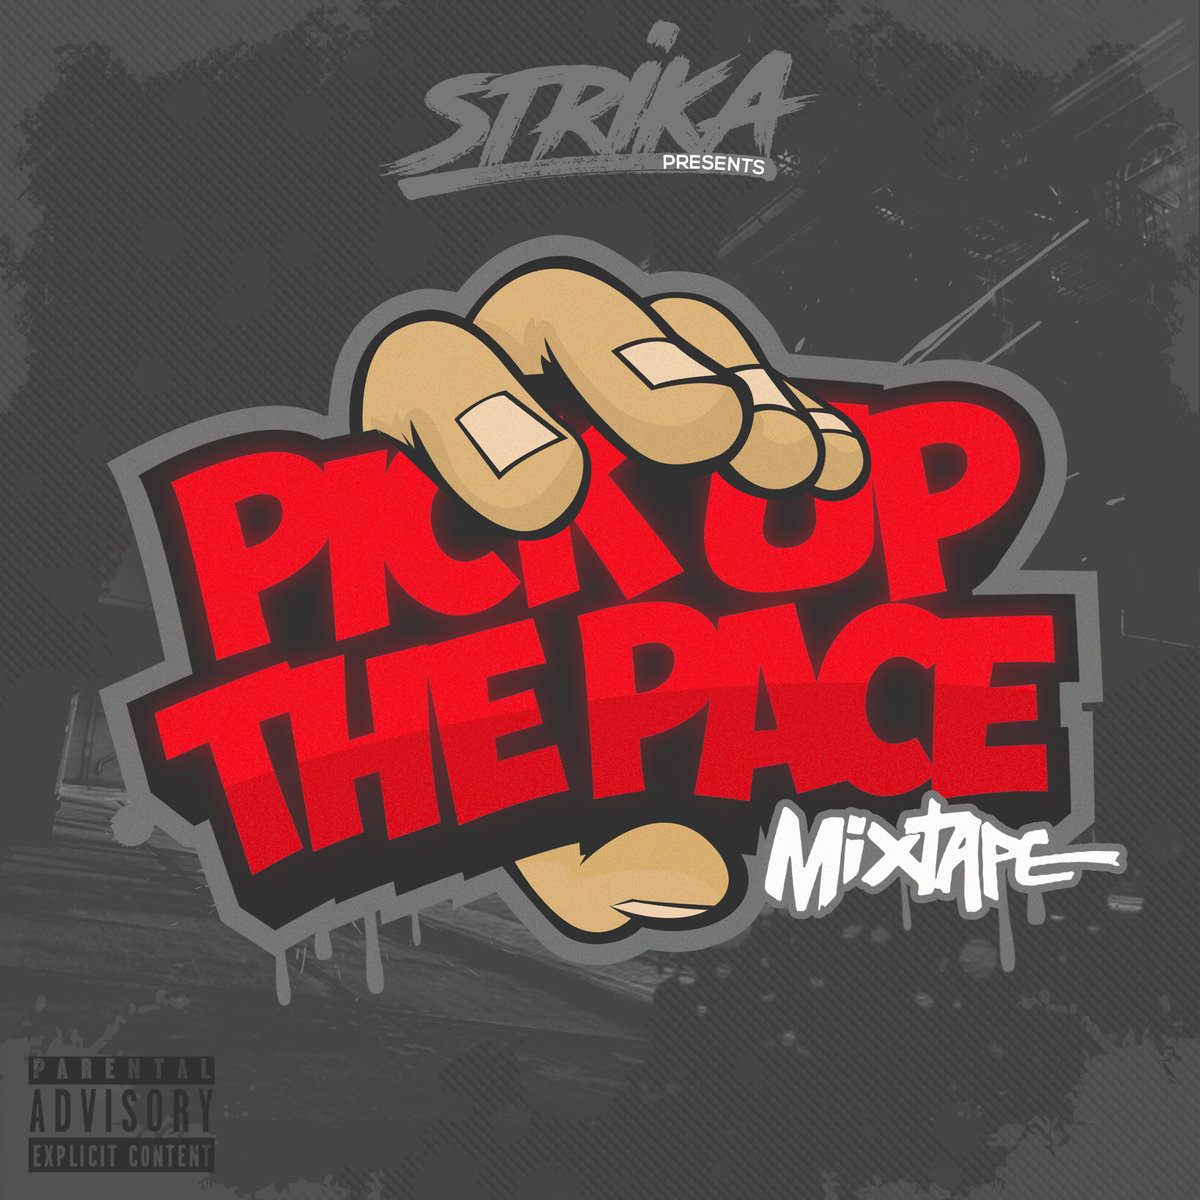 New Music: Strika – Pick Up The Pace (Free Mixtape)